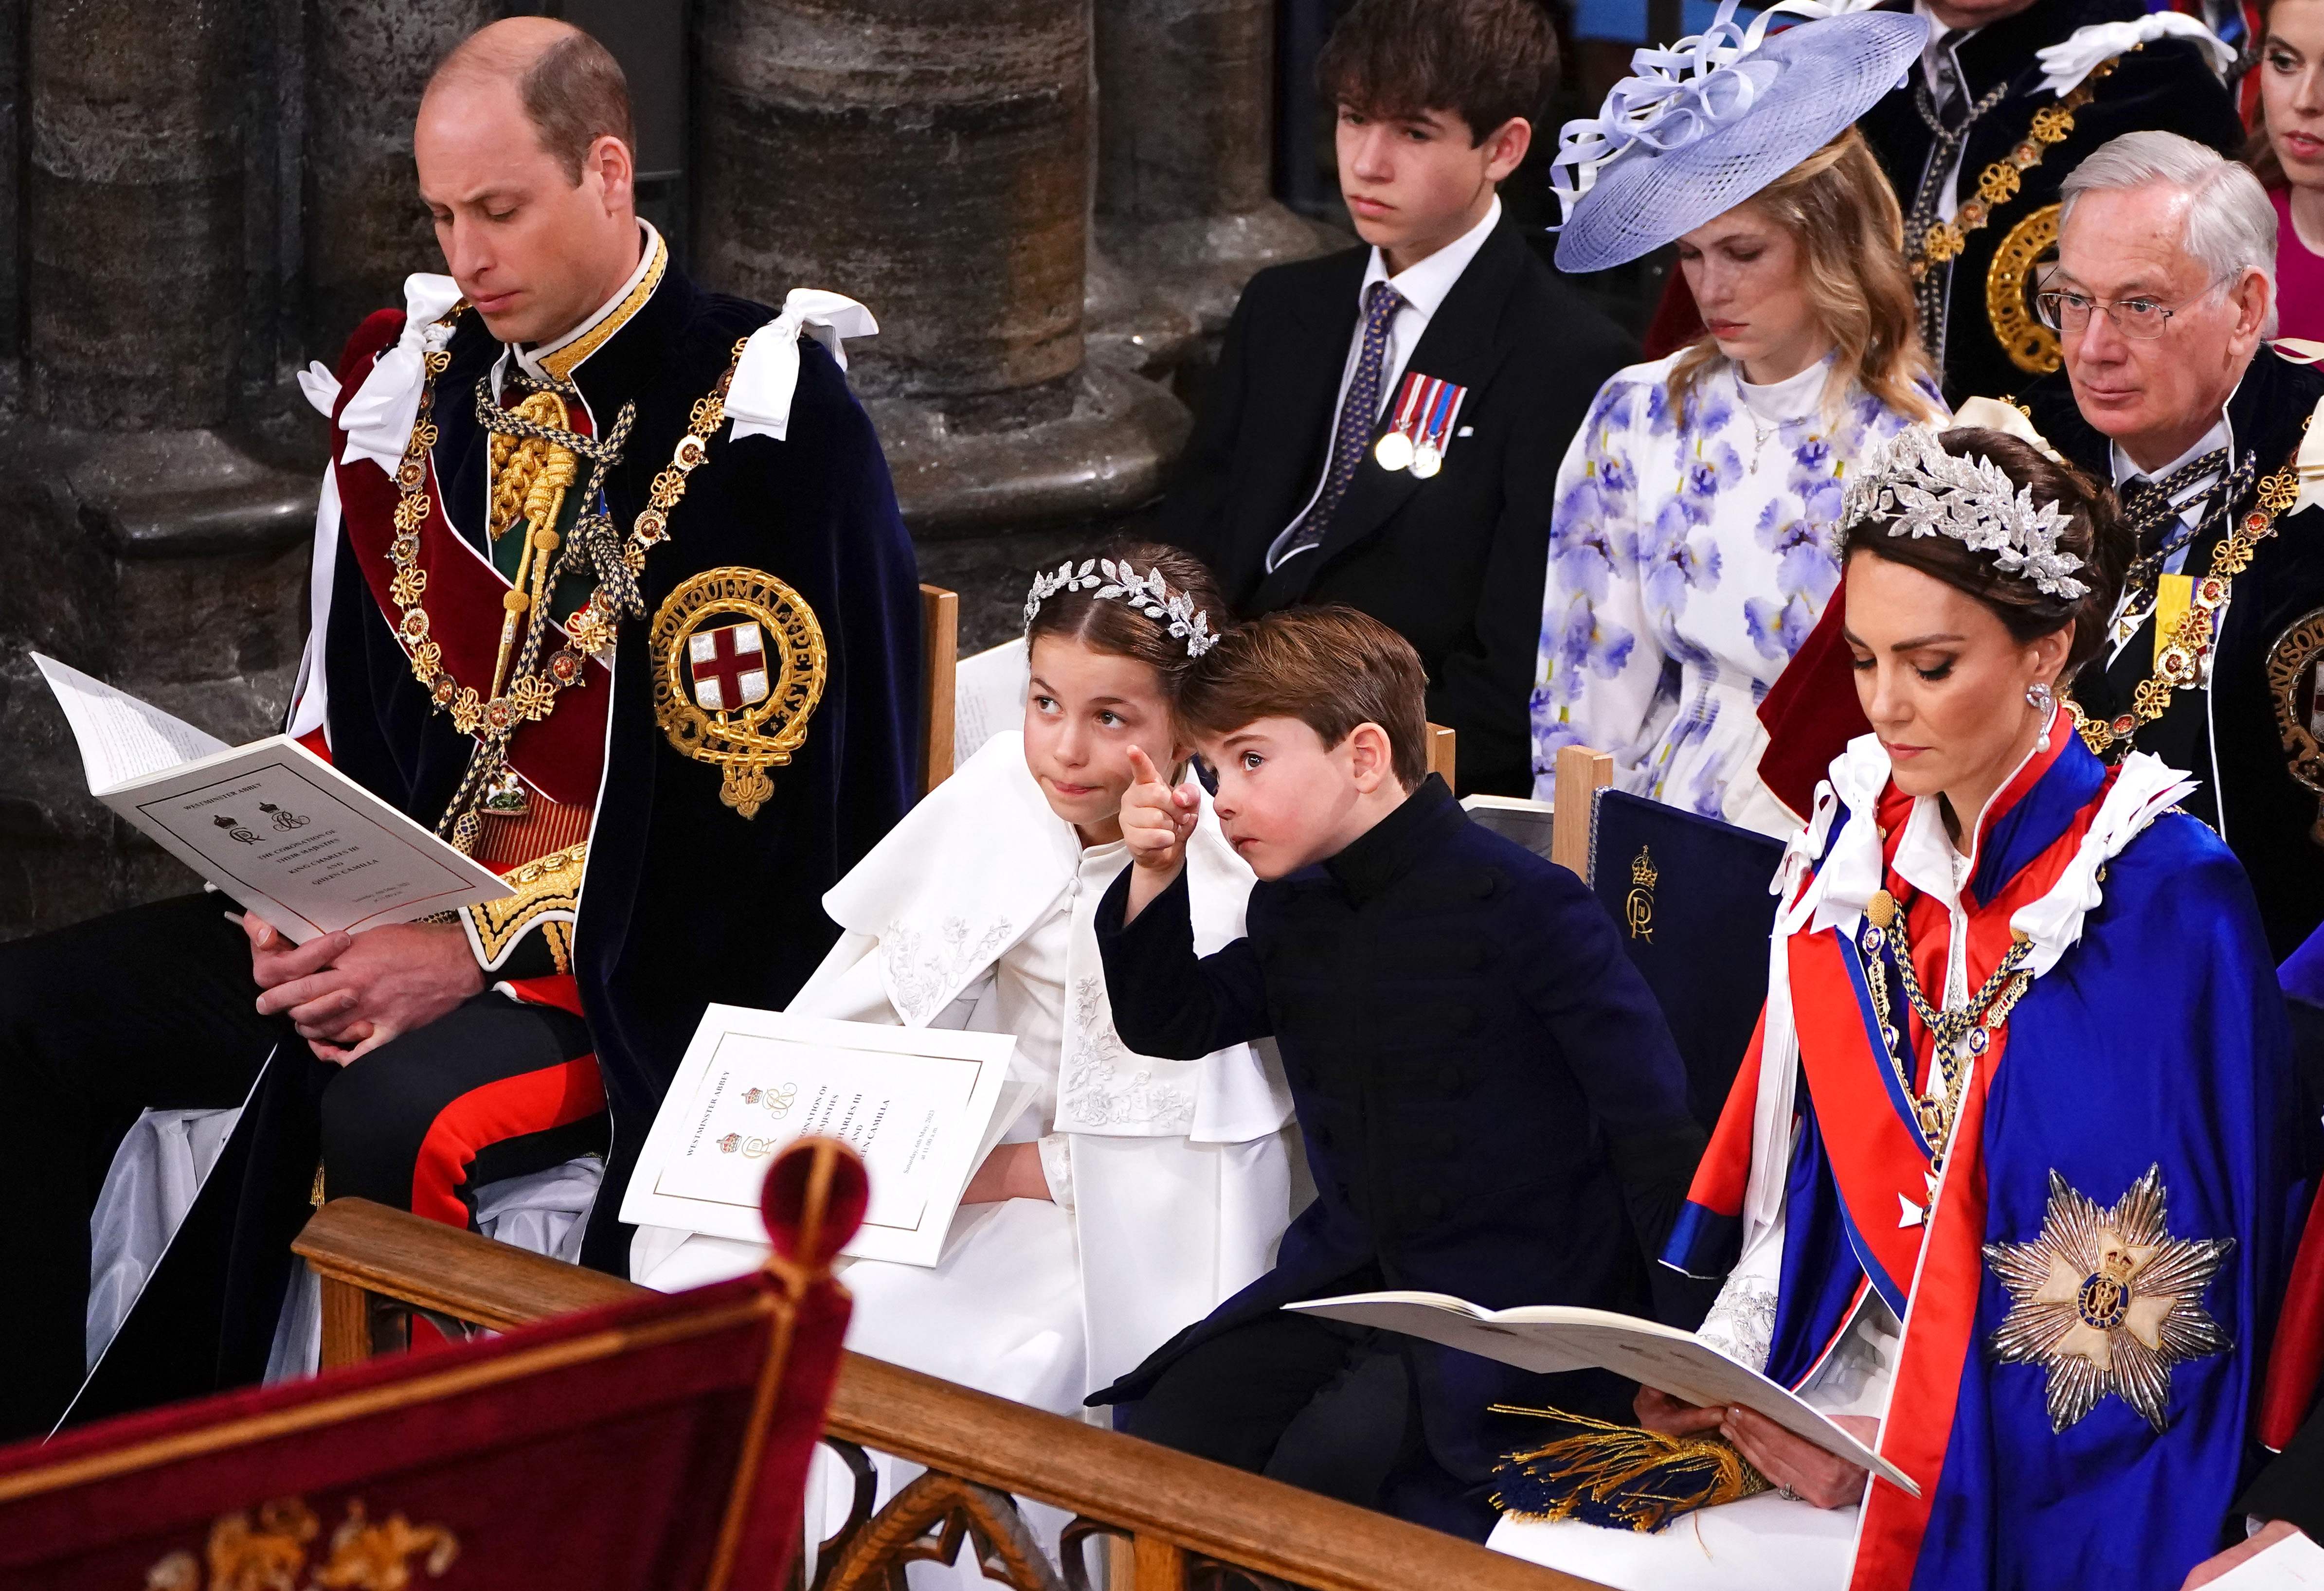 The coronation ceremony lasted several hours, during which Prince William's children were talking about something